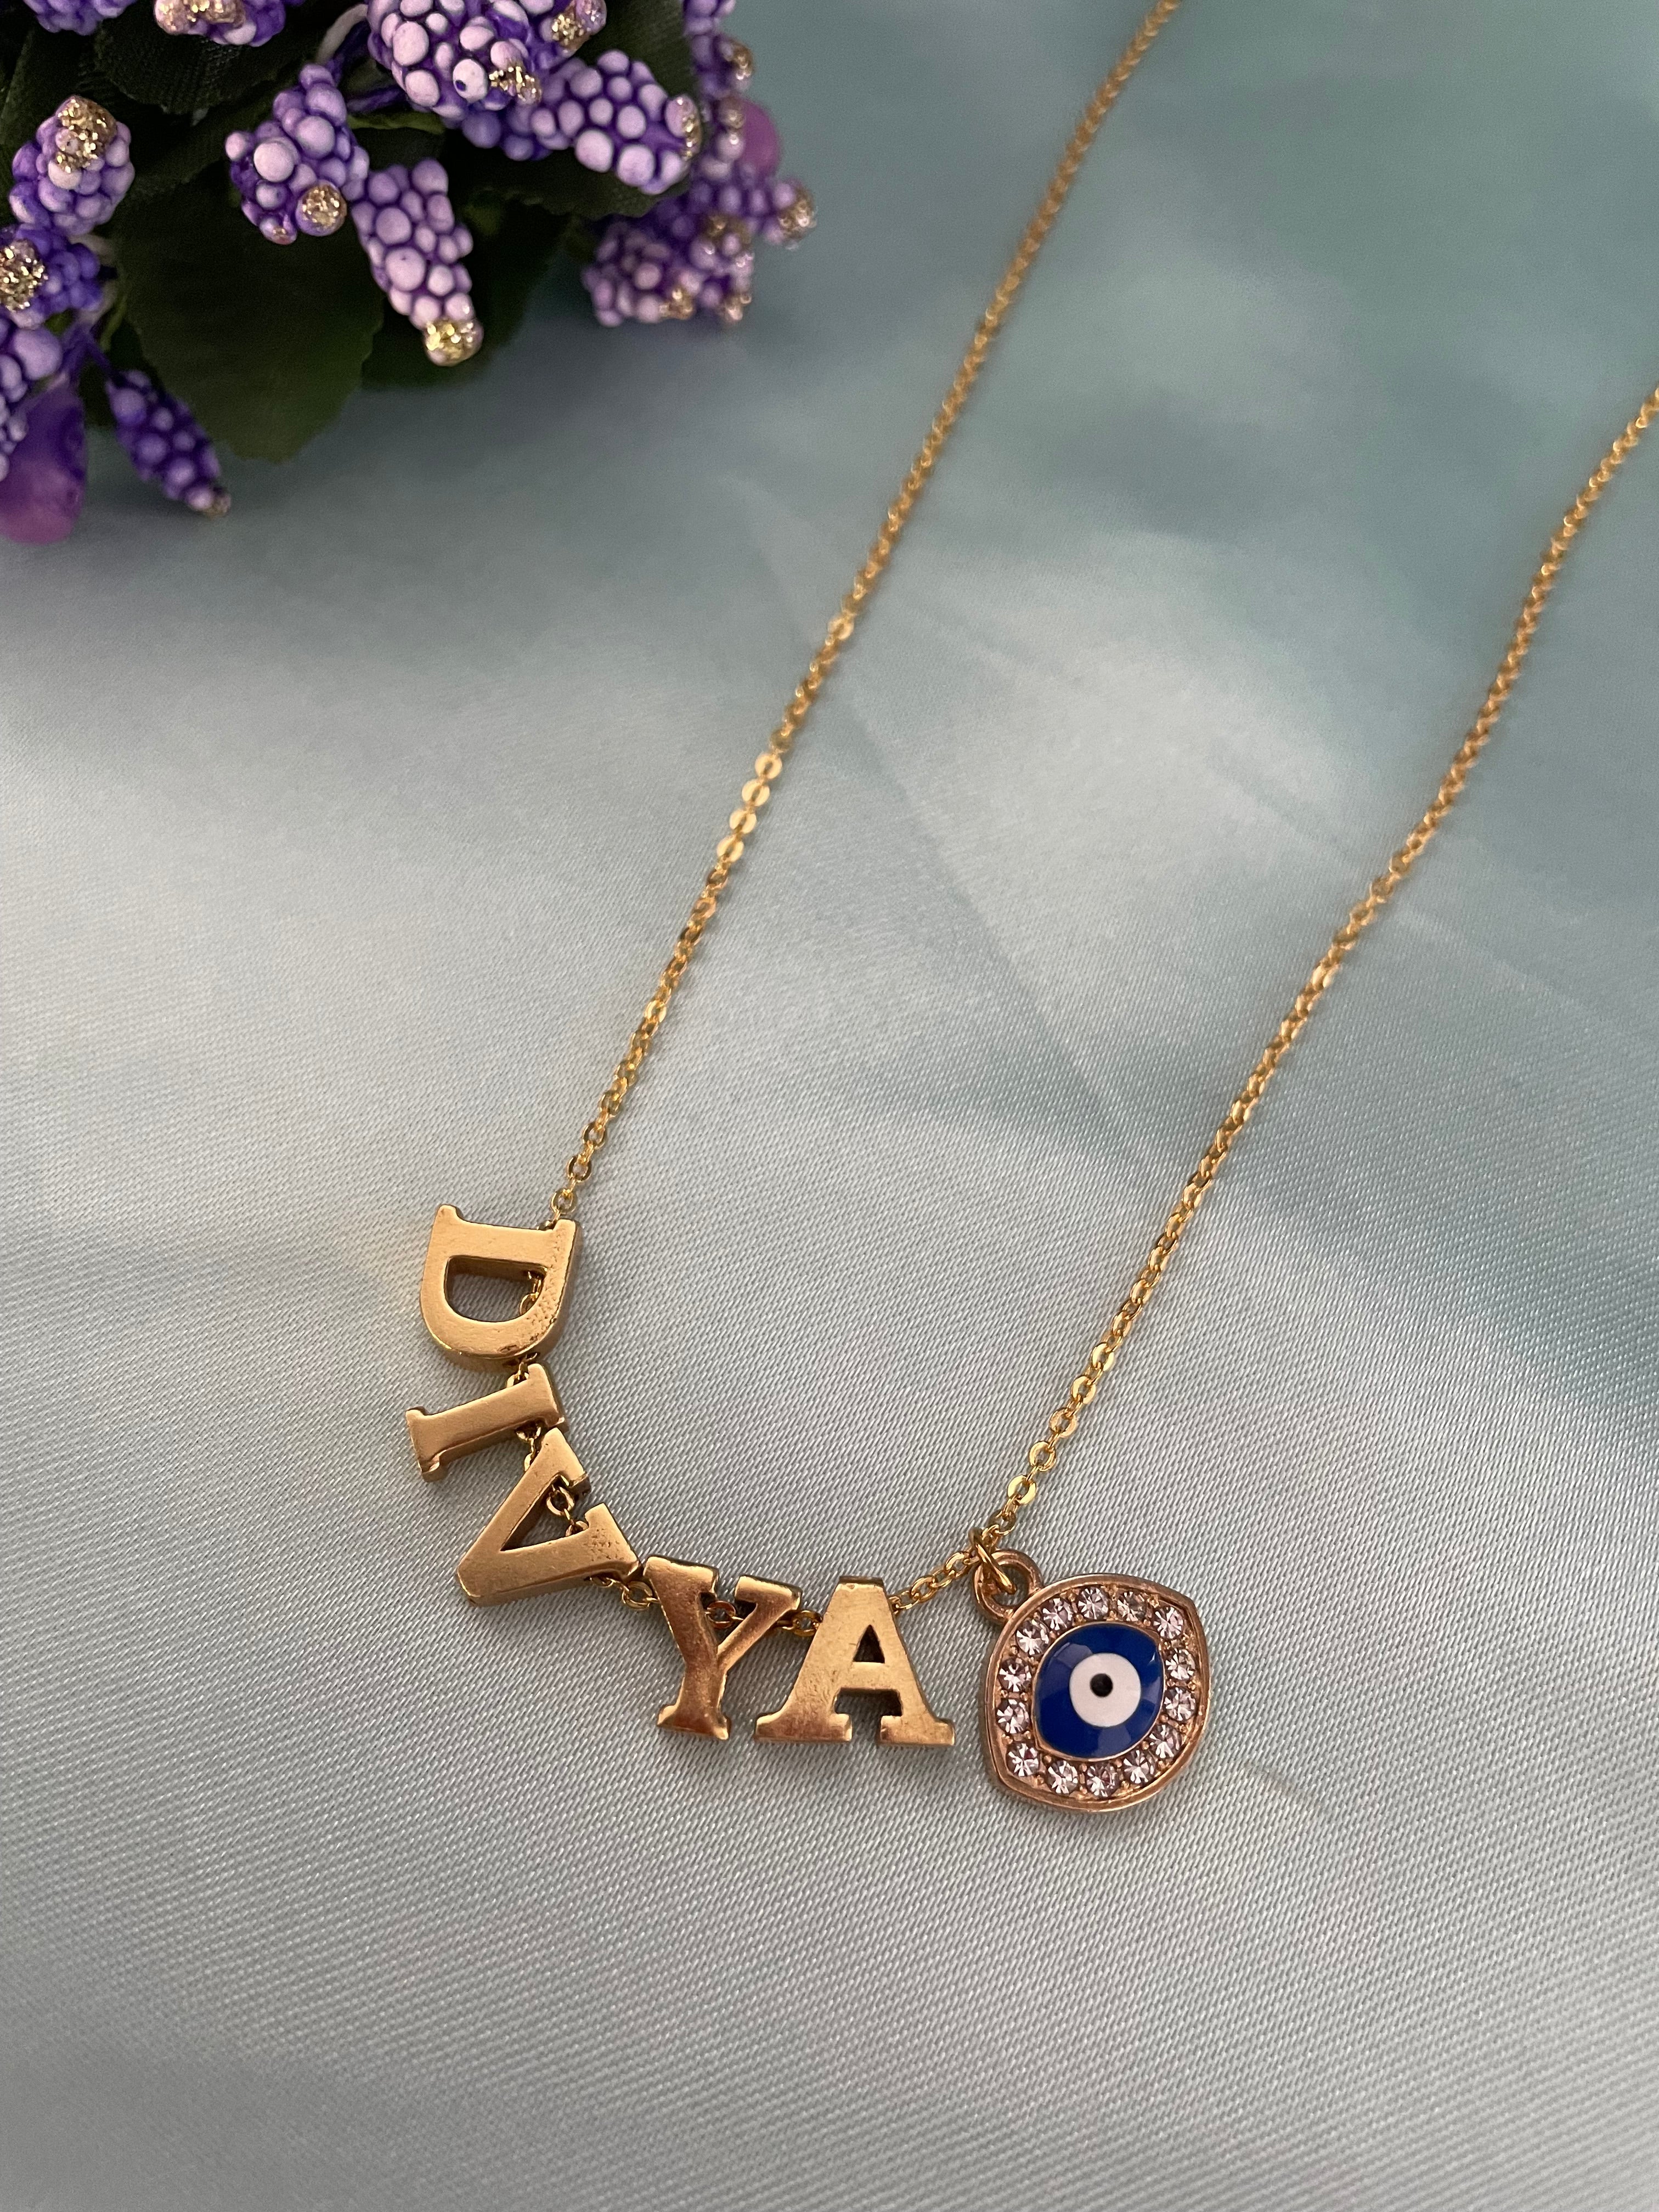 image for Name Necklace with American Diamond Evil Eye